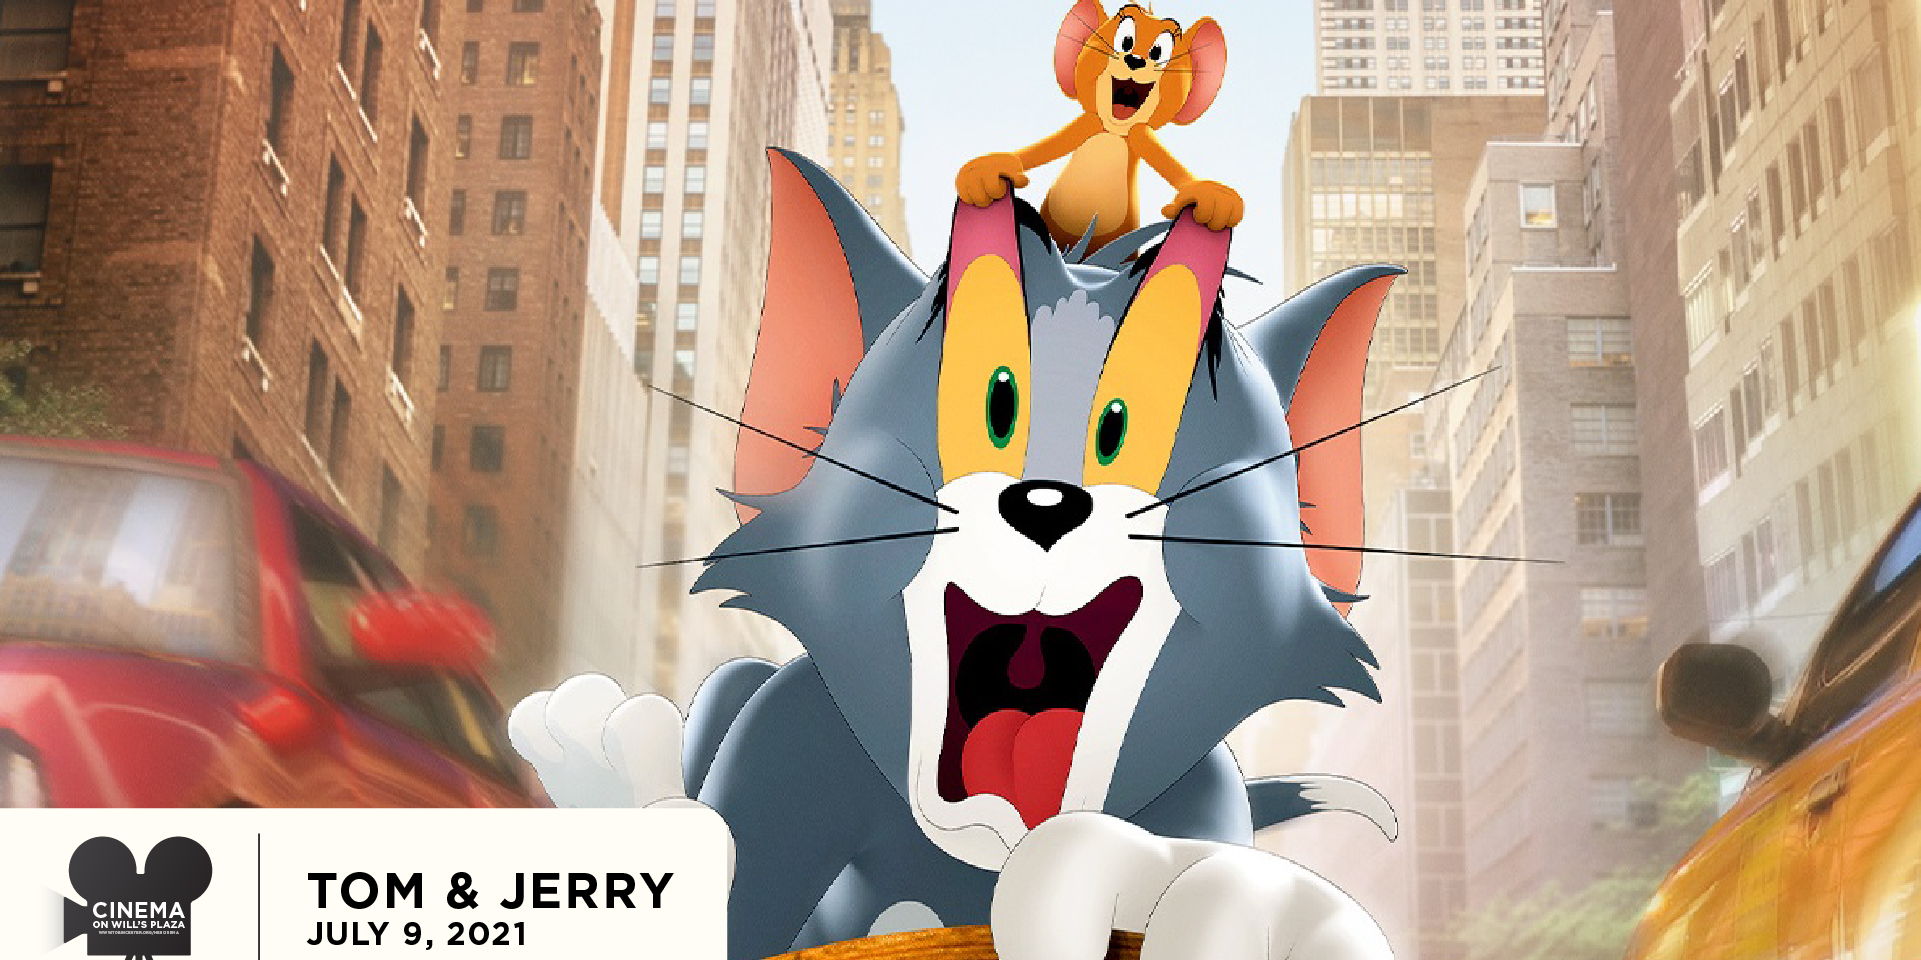 Cinema on Will's Plaza | Tom & Jerry promotional image